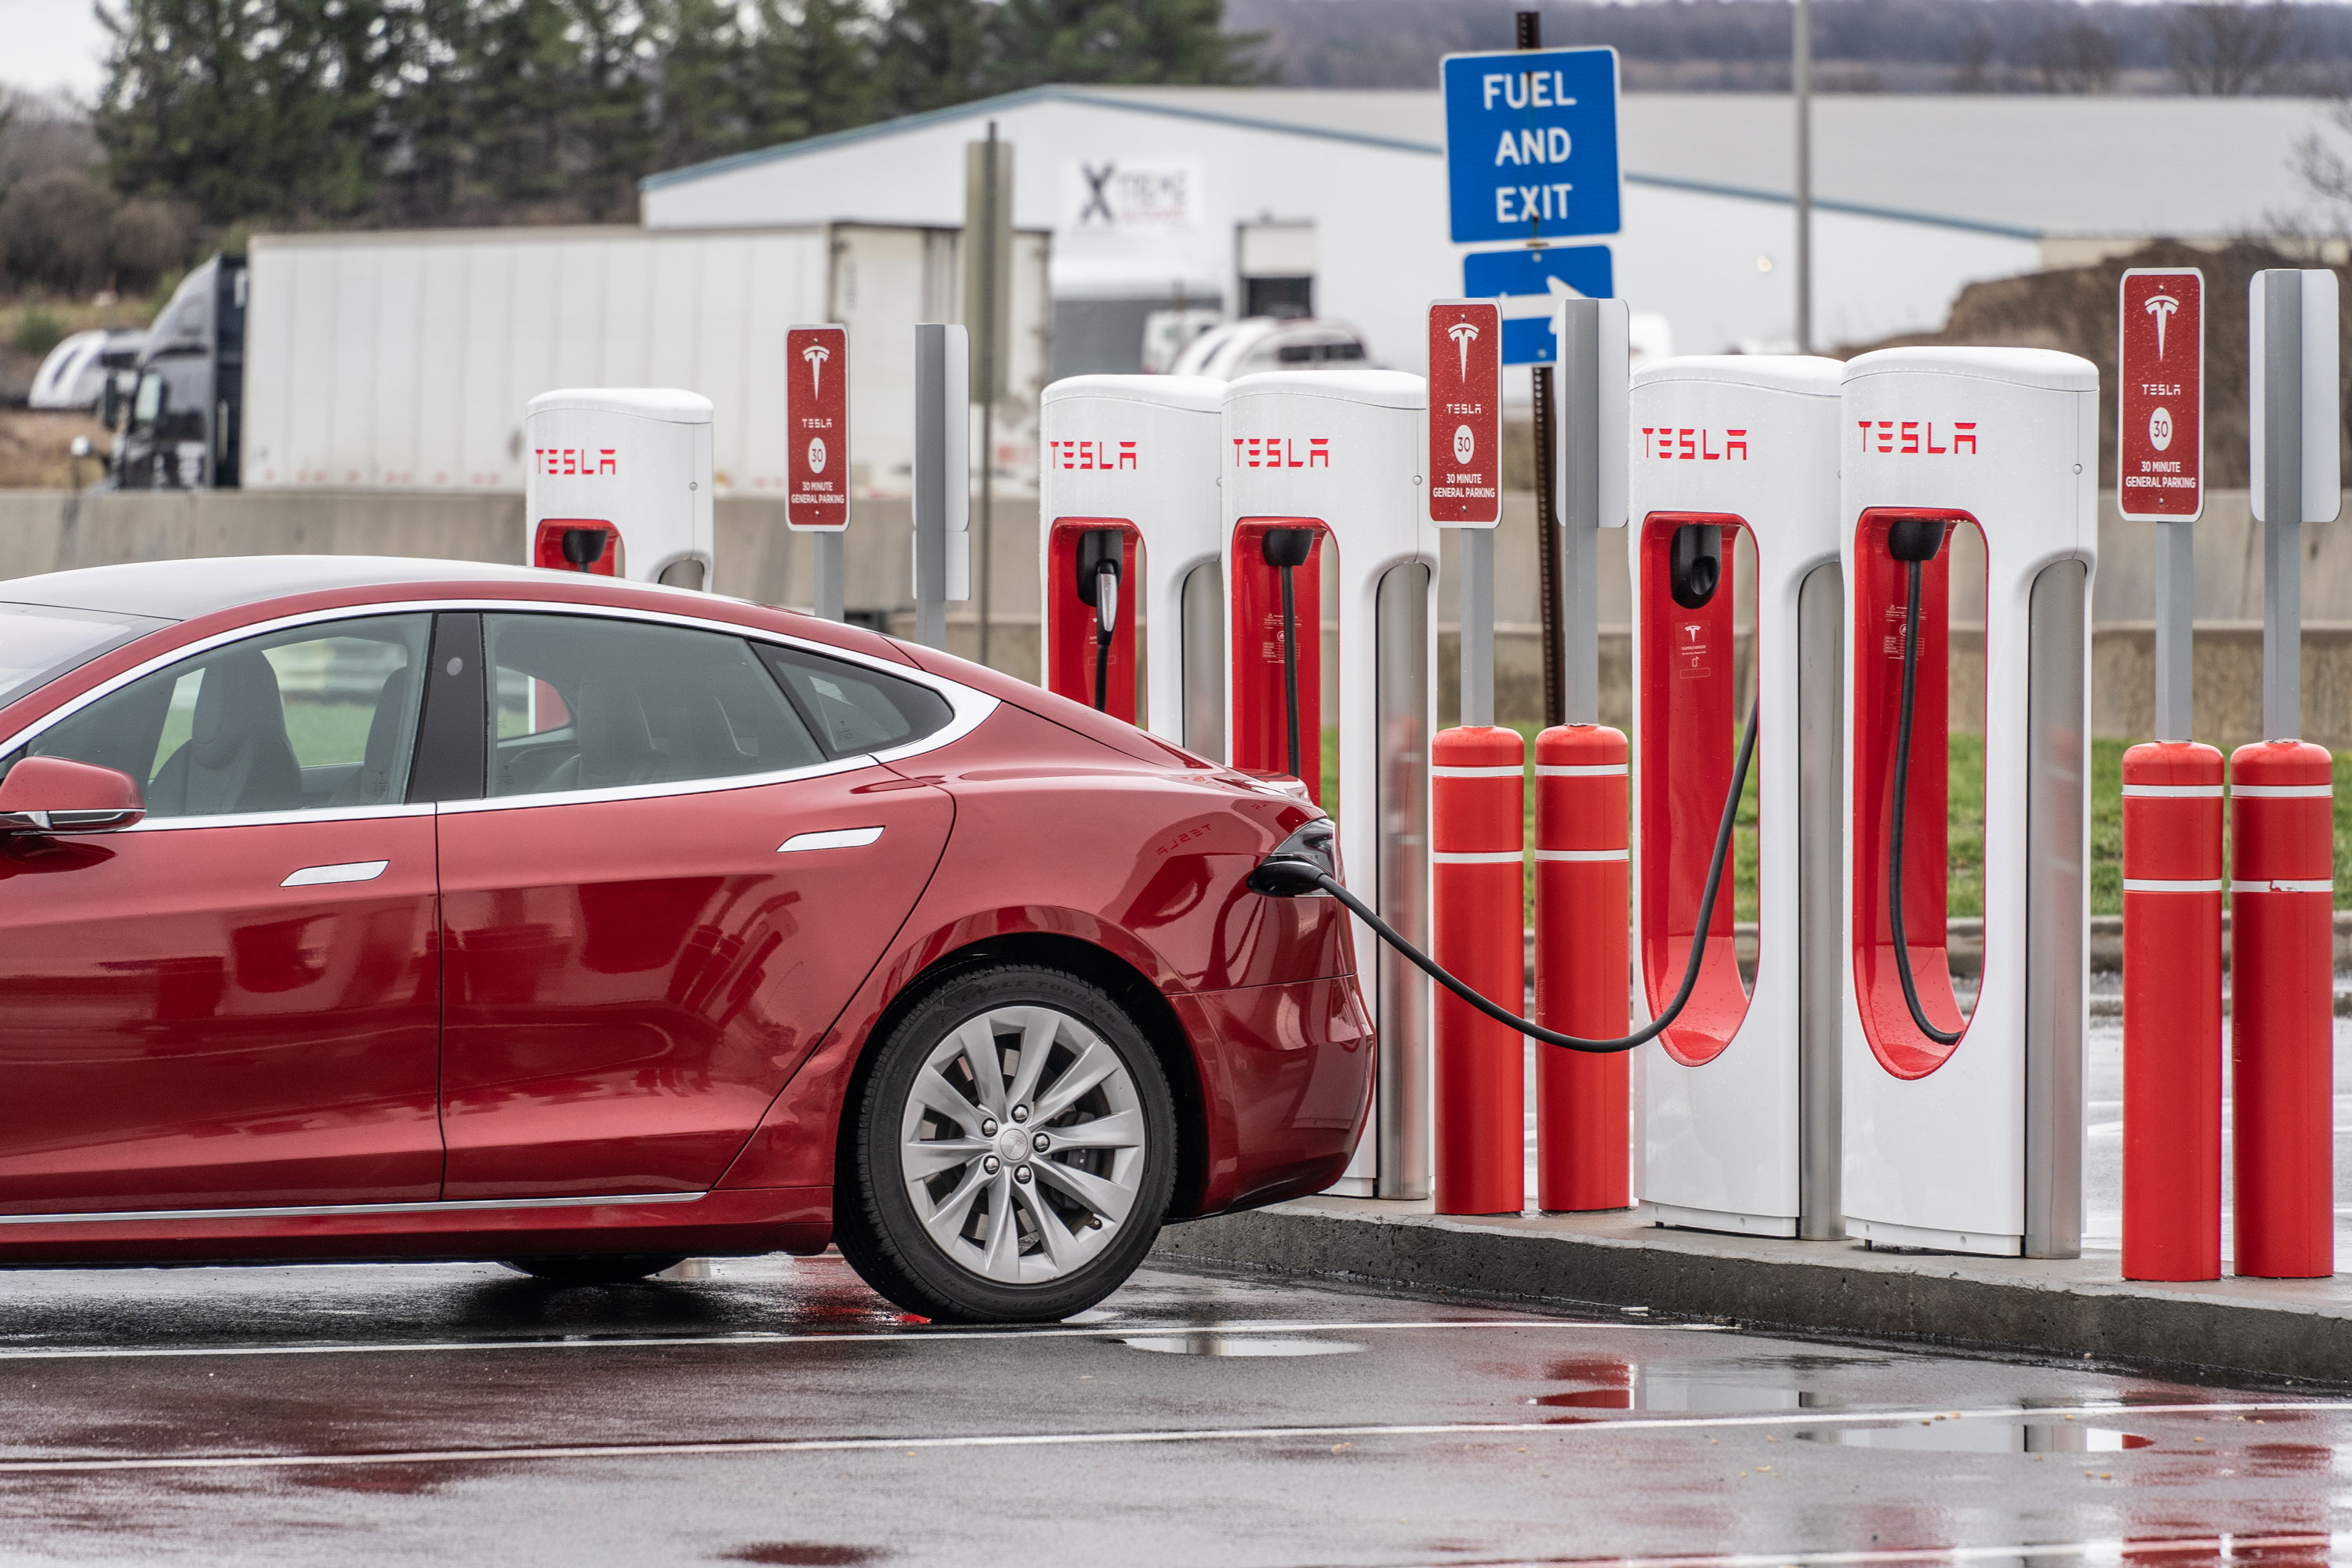 An exponential rise in electric vehicle sales is negatively impacting gas tax revenue